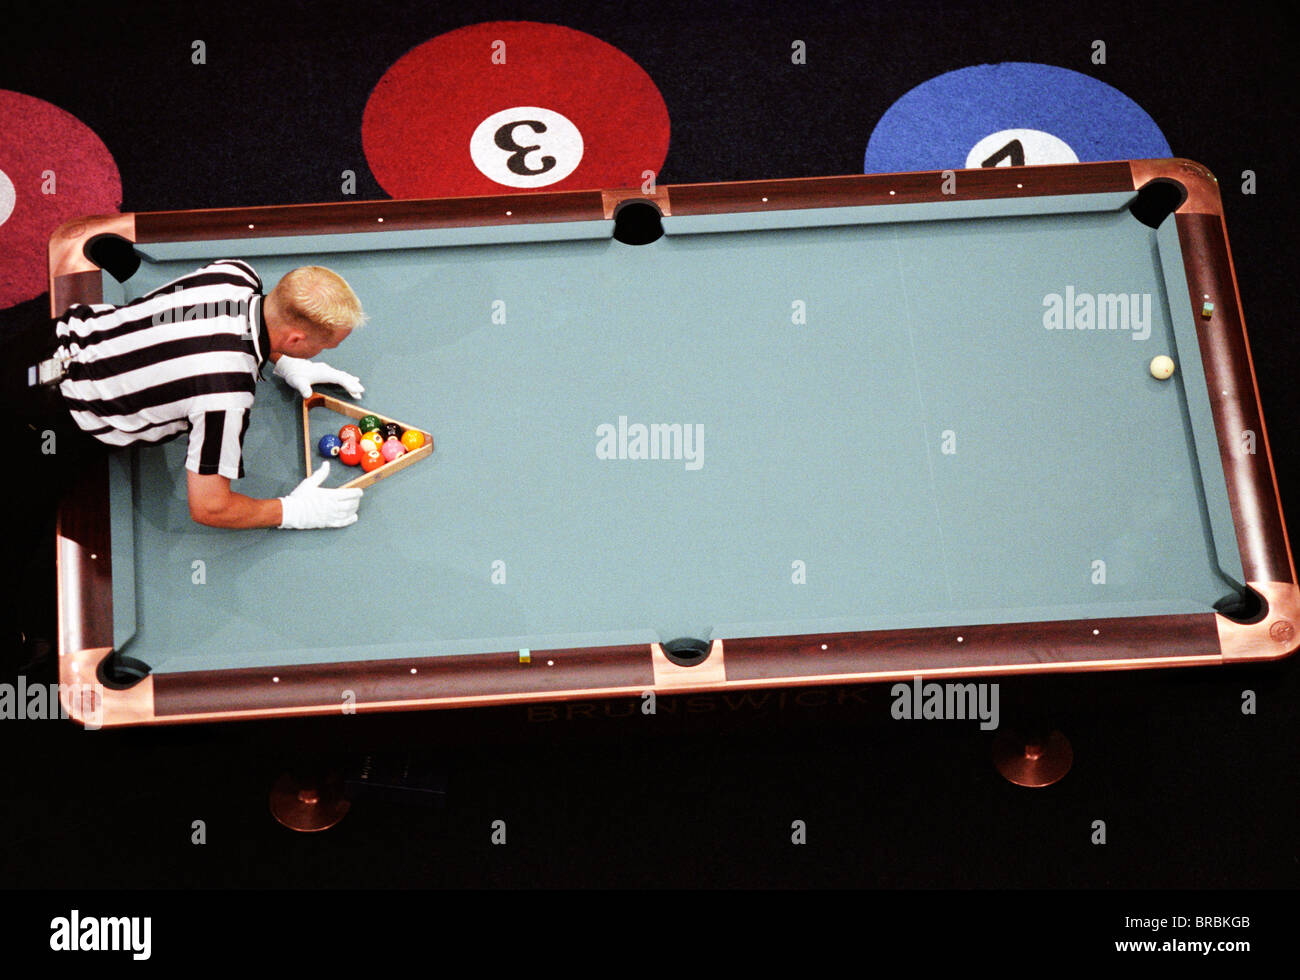 Arial view of official setting up the rack for eight ball pool Stock Photo